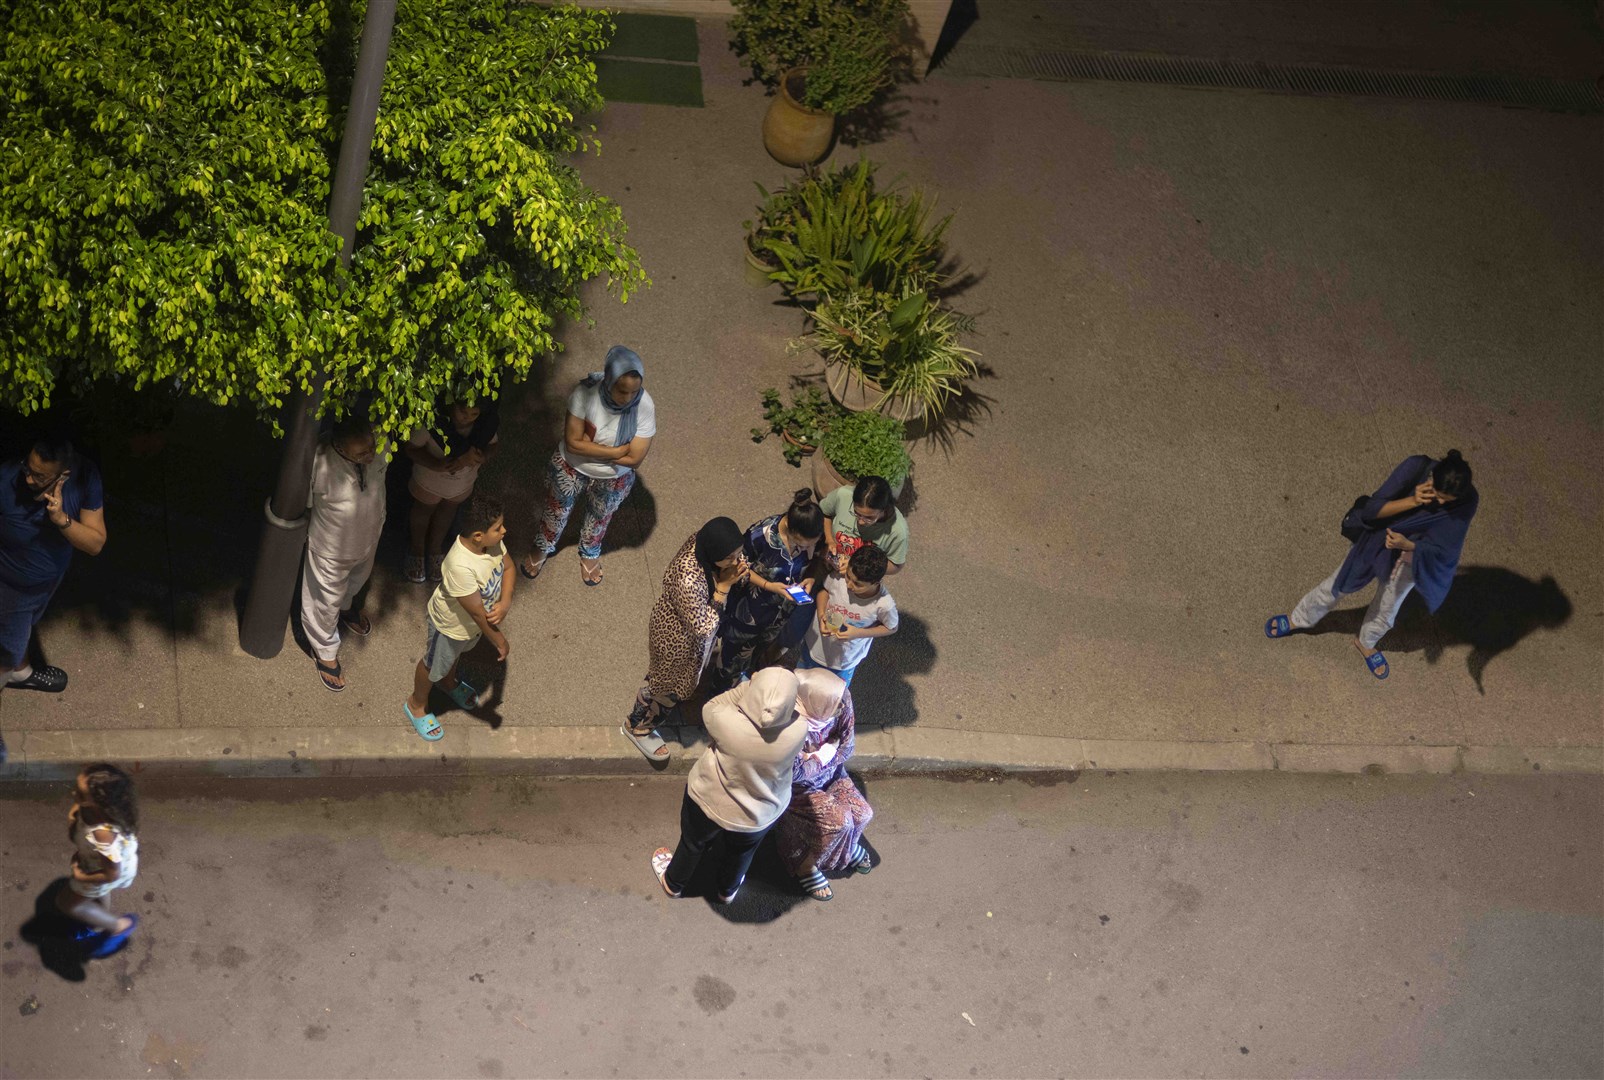 People take shelter outside and check for news on their mobile phones after the earthquake (Mosa’ab Elshamy/AP/PA)